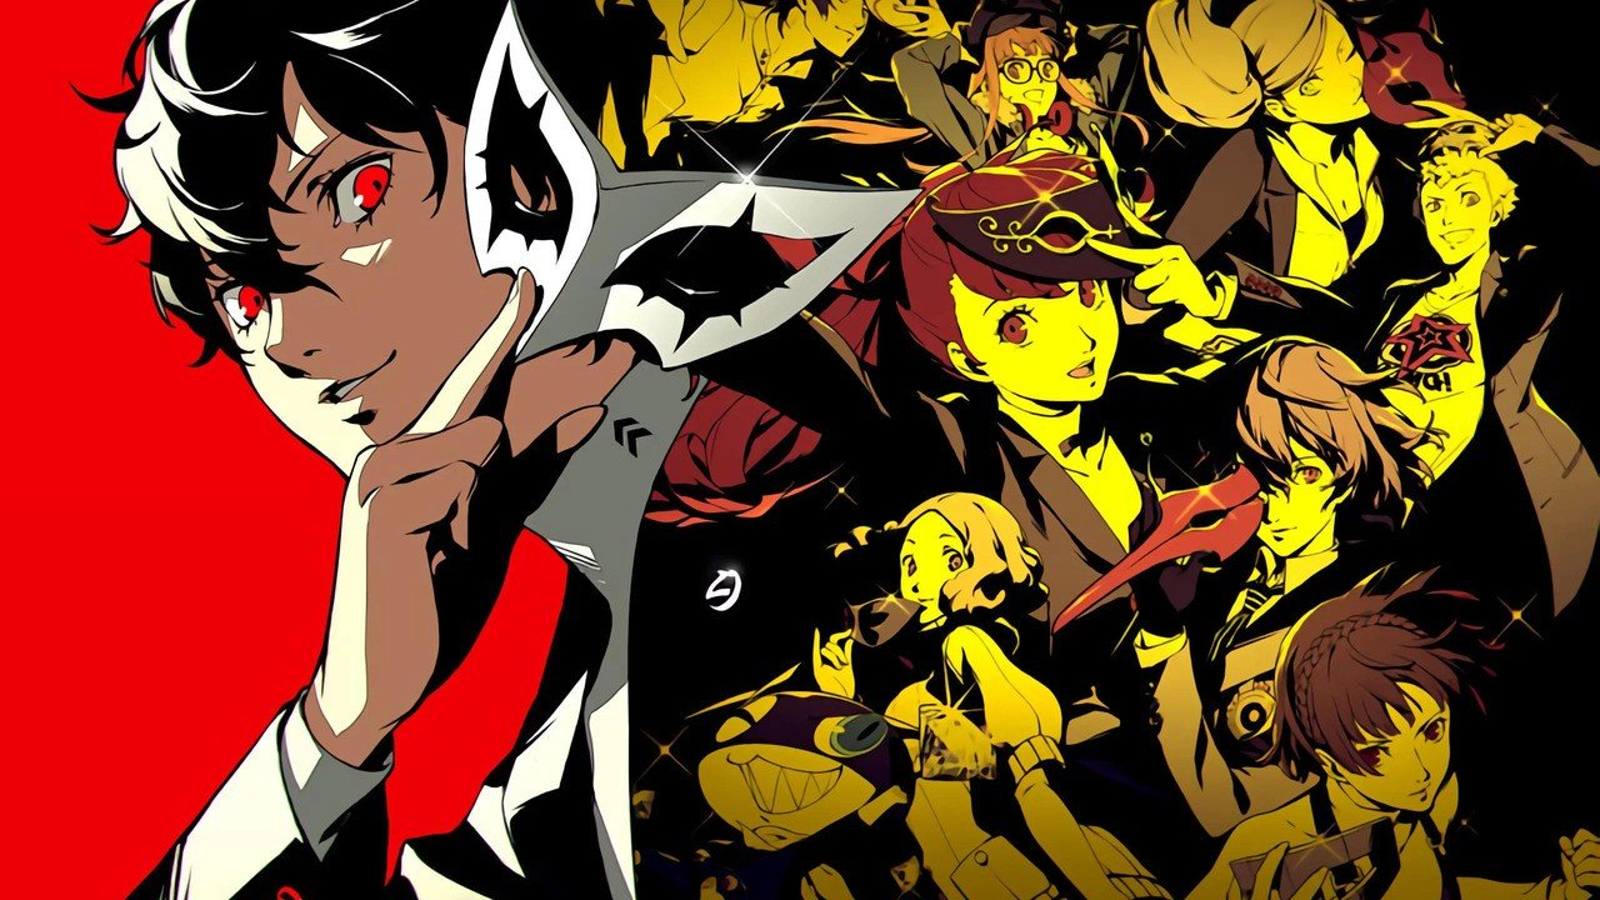 Persona 5 Royal Characters Ranked in Honor of the Game's First Anniversary